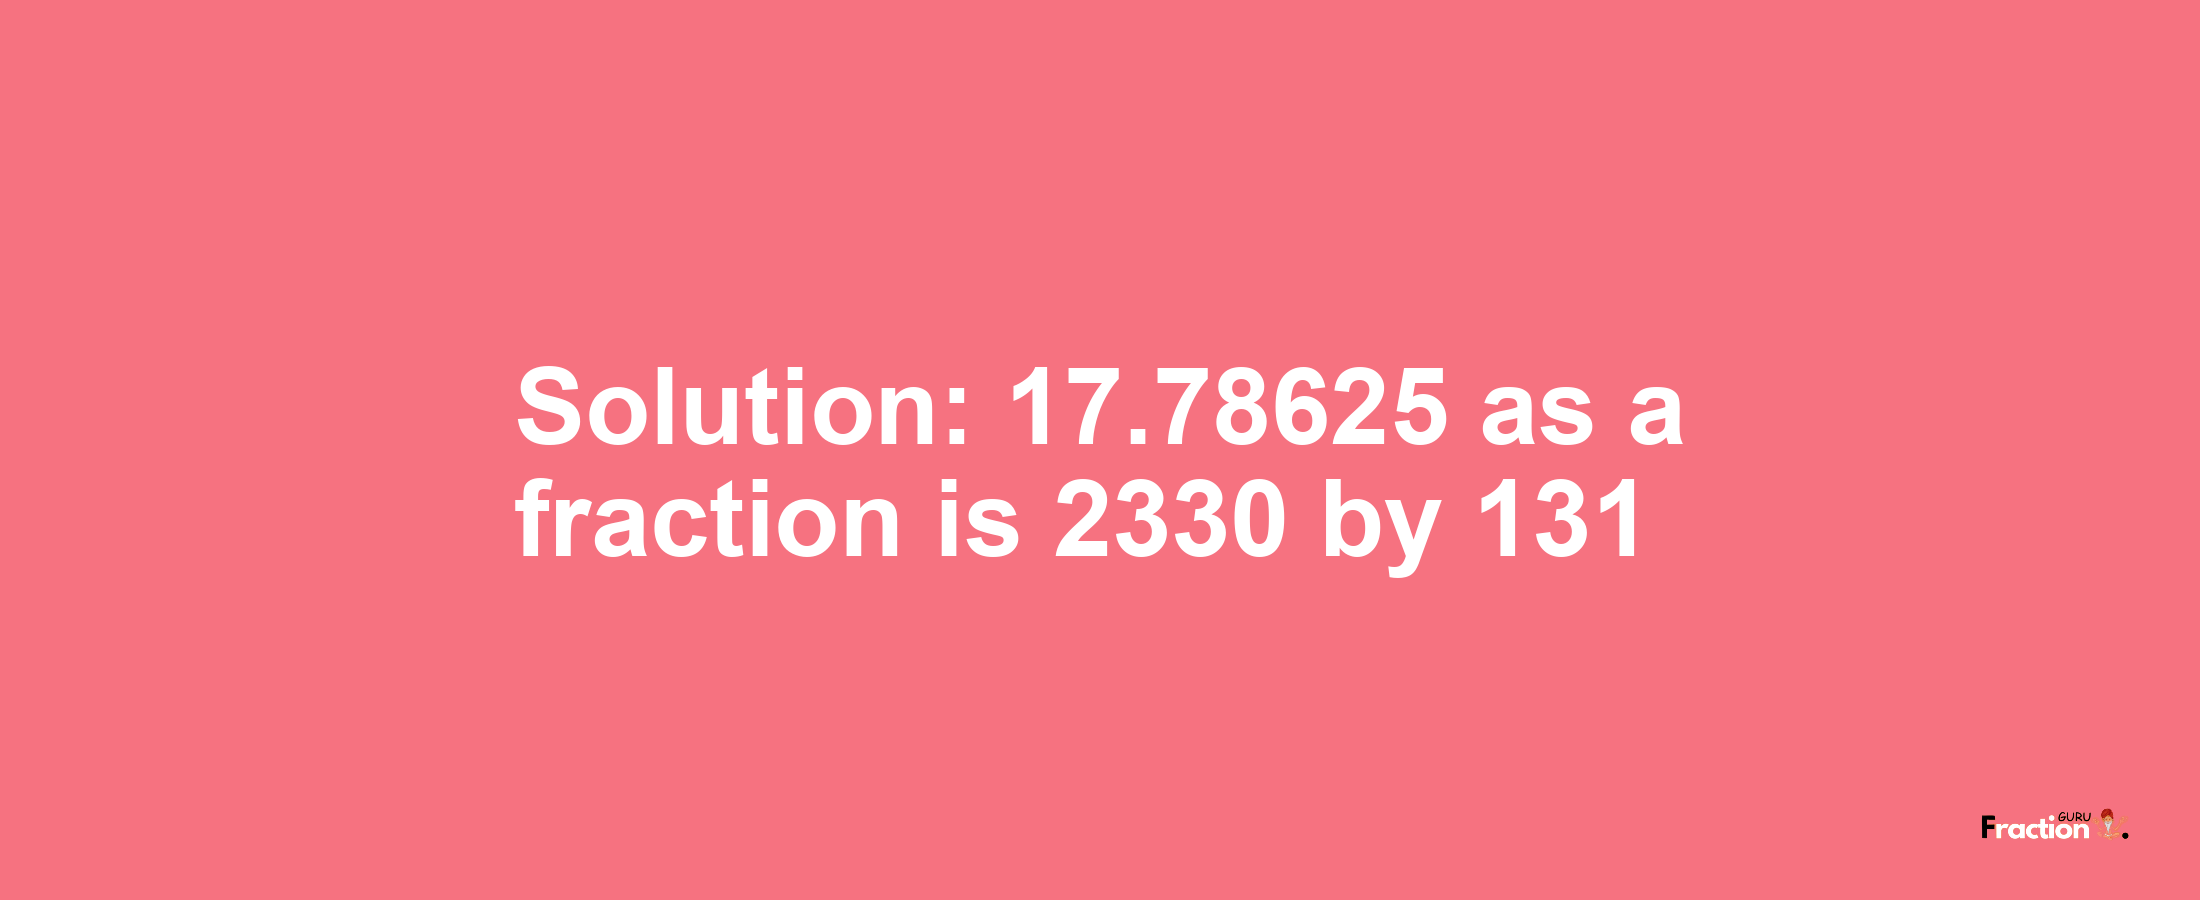 Solution:17.78625 as a fraction is 2330/131